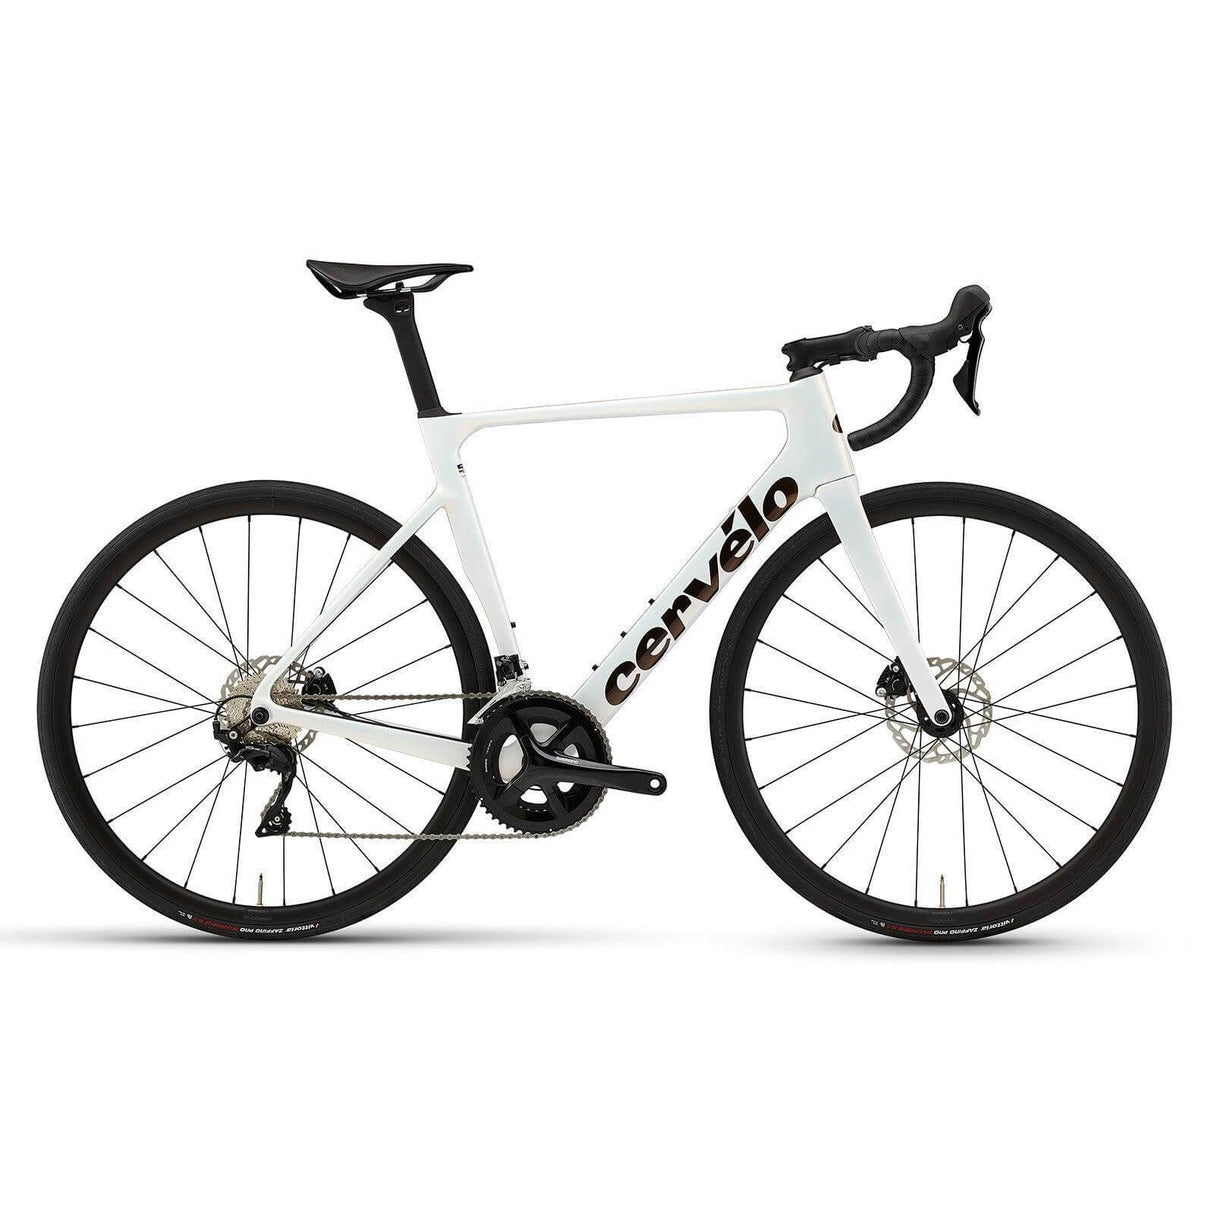 Cervelo Soloist 105 | Strictly Bicycles